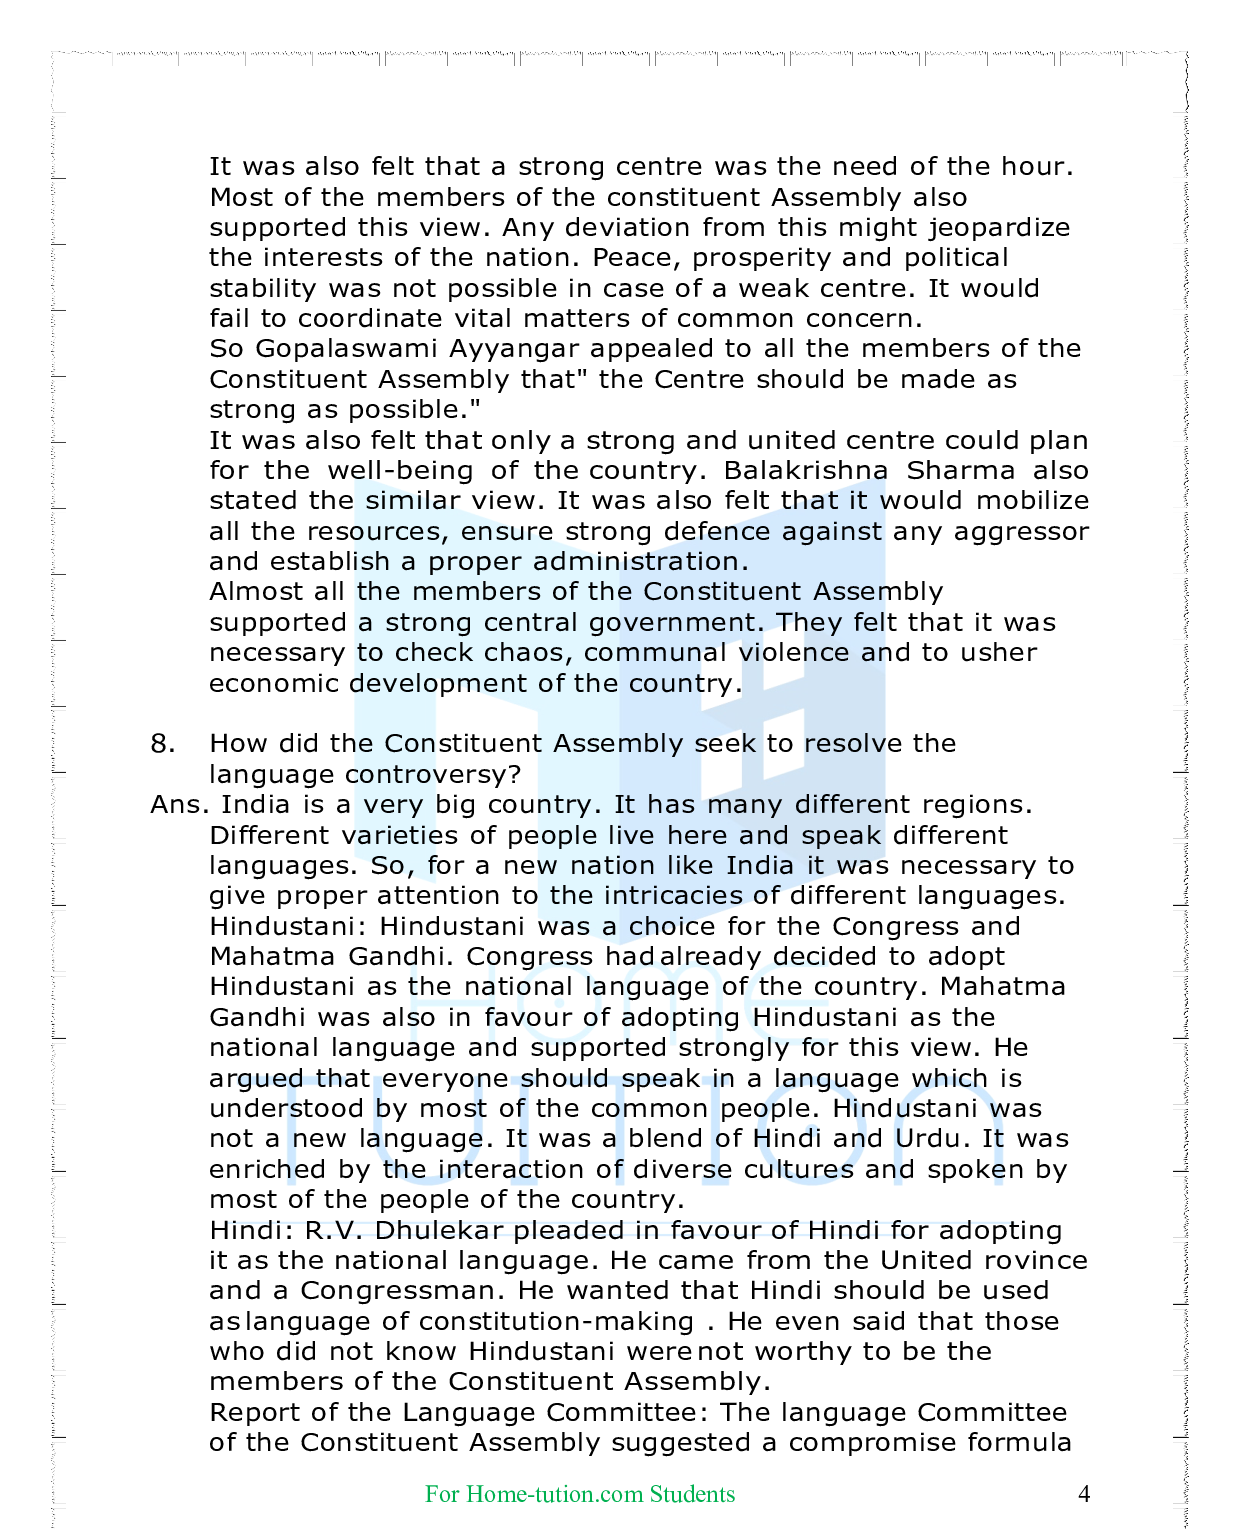 NCERT Solutions Chapter 15 Framing the Constitution the beginning of a new era